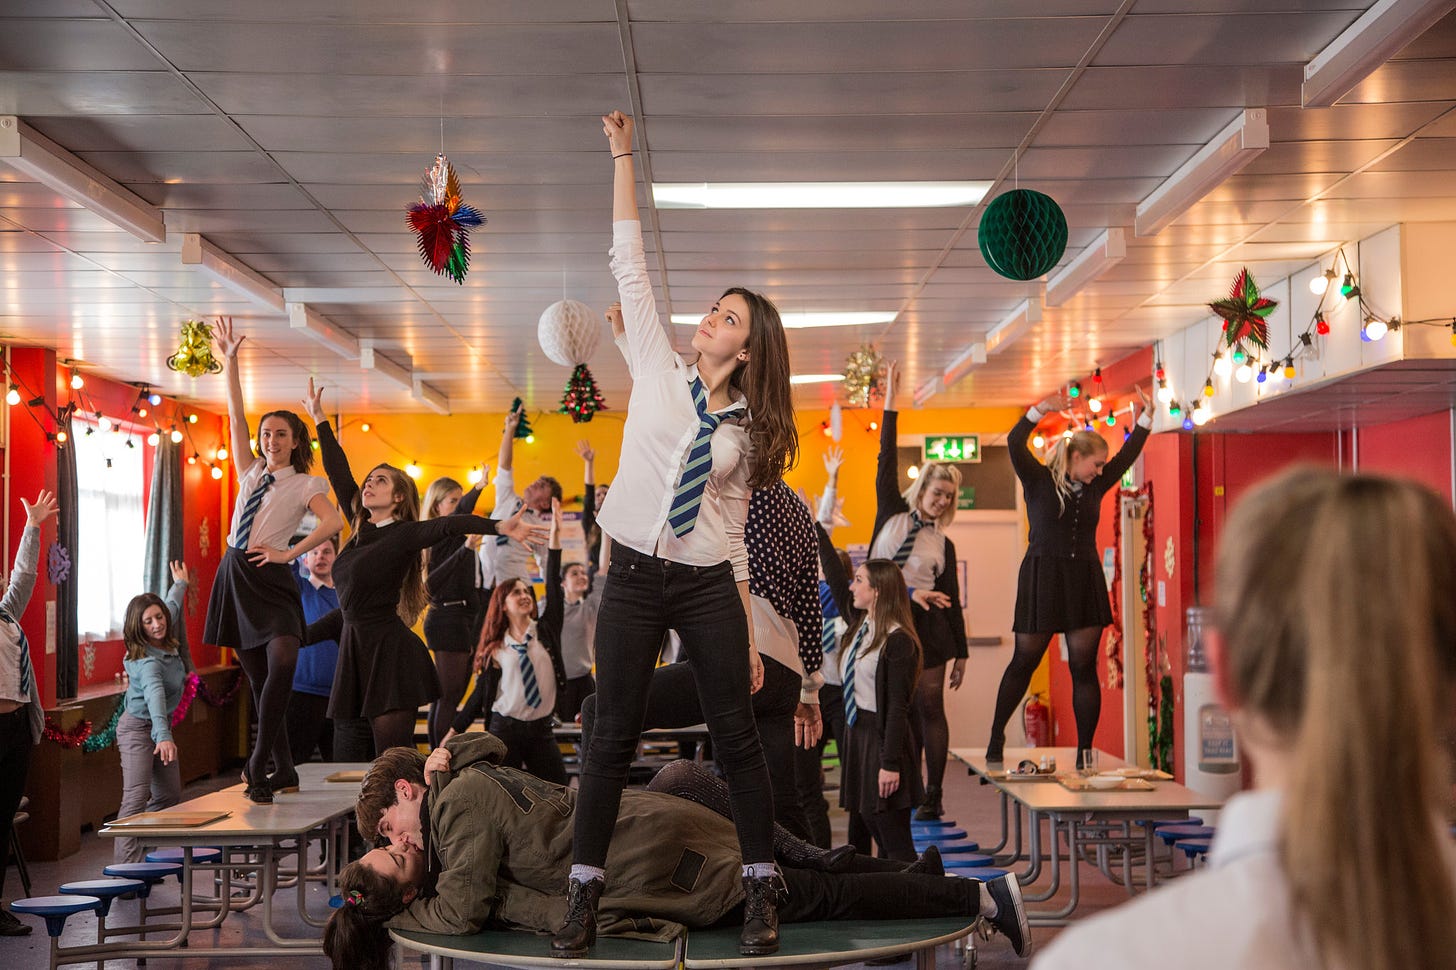 Still from Anna and the Apocalypse. A white girl with long brown hair and wearing school uniform stands on a table, arm raised. Her classmates are behind her, also with arms raised, mid dance routine.